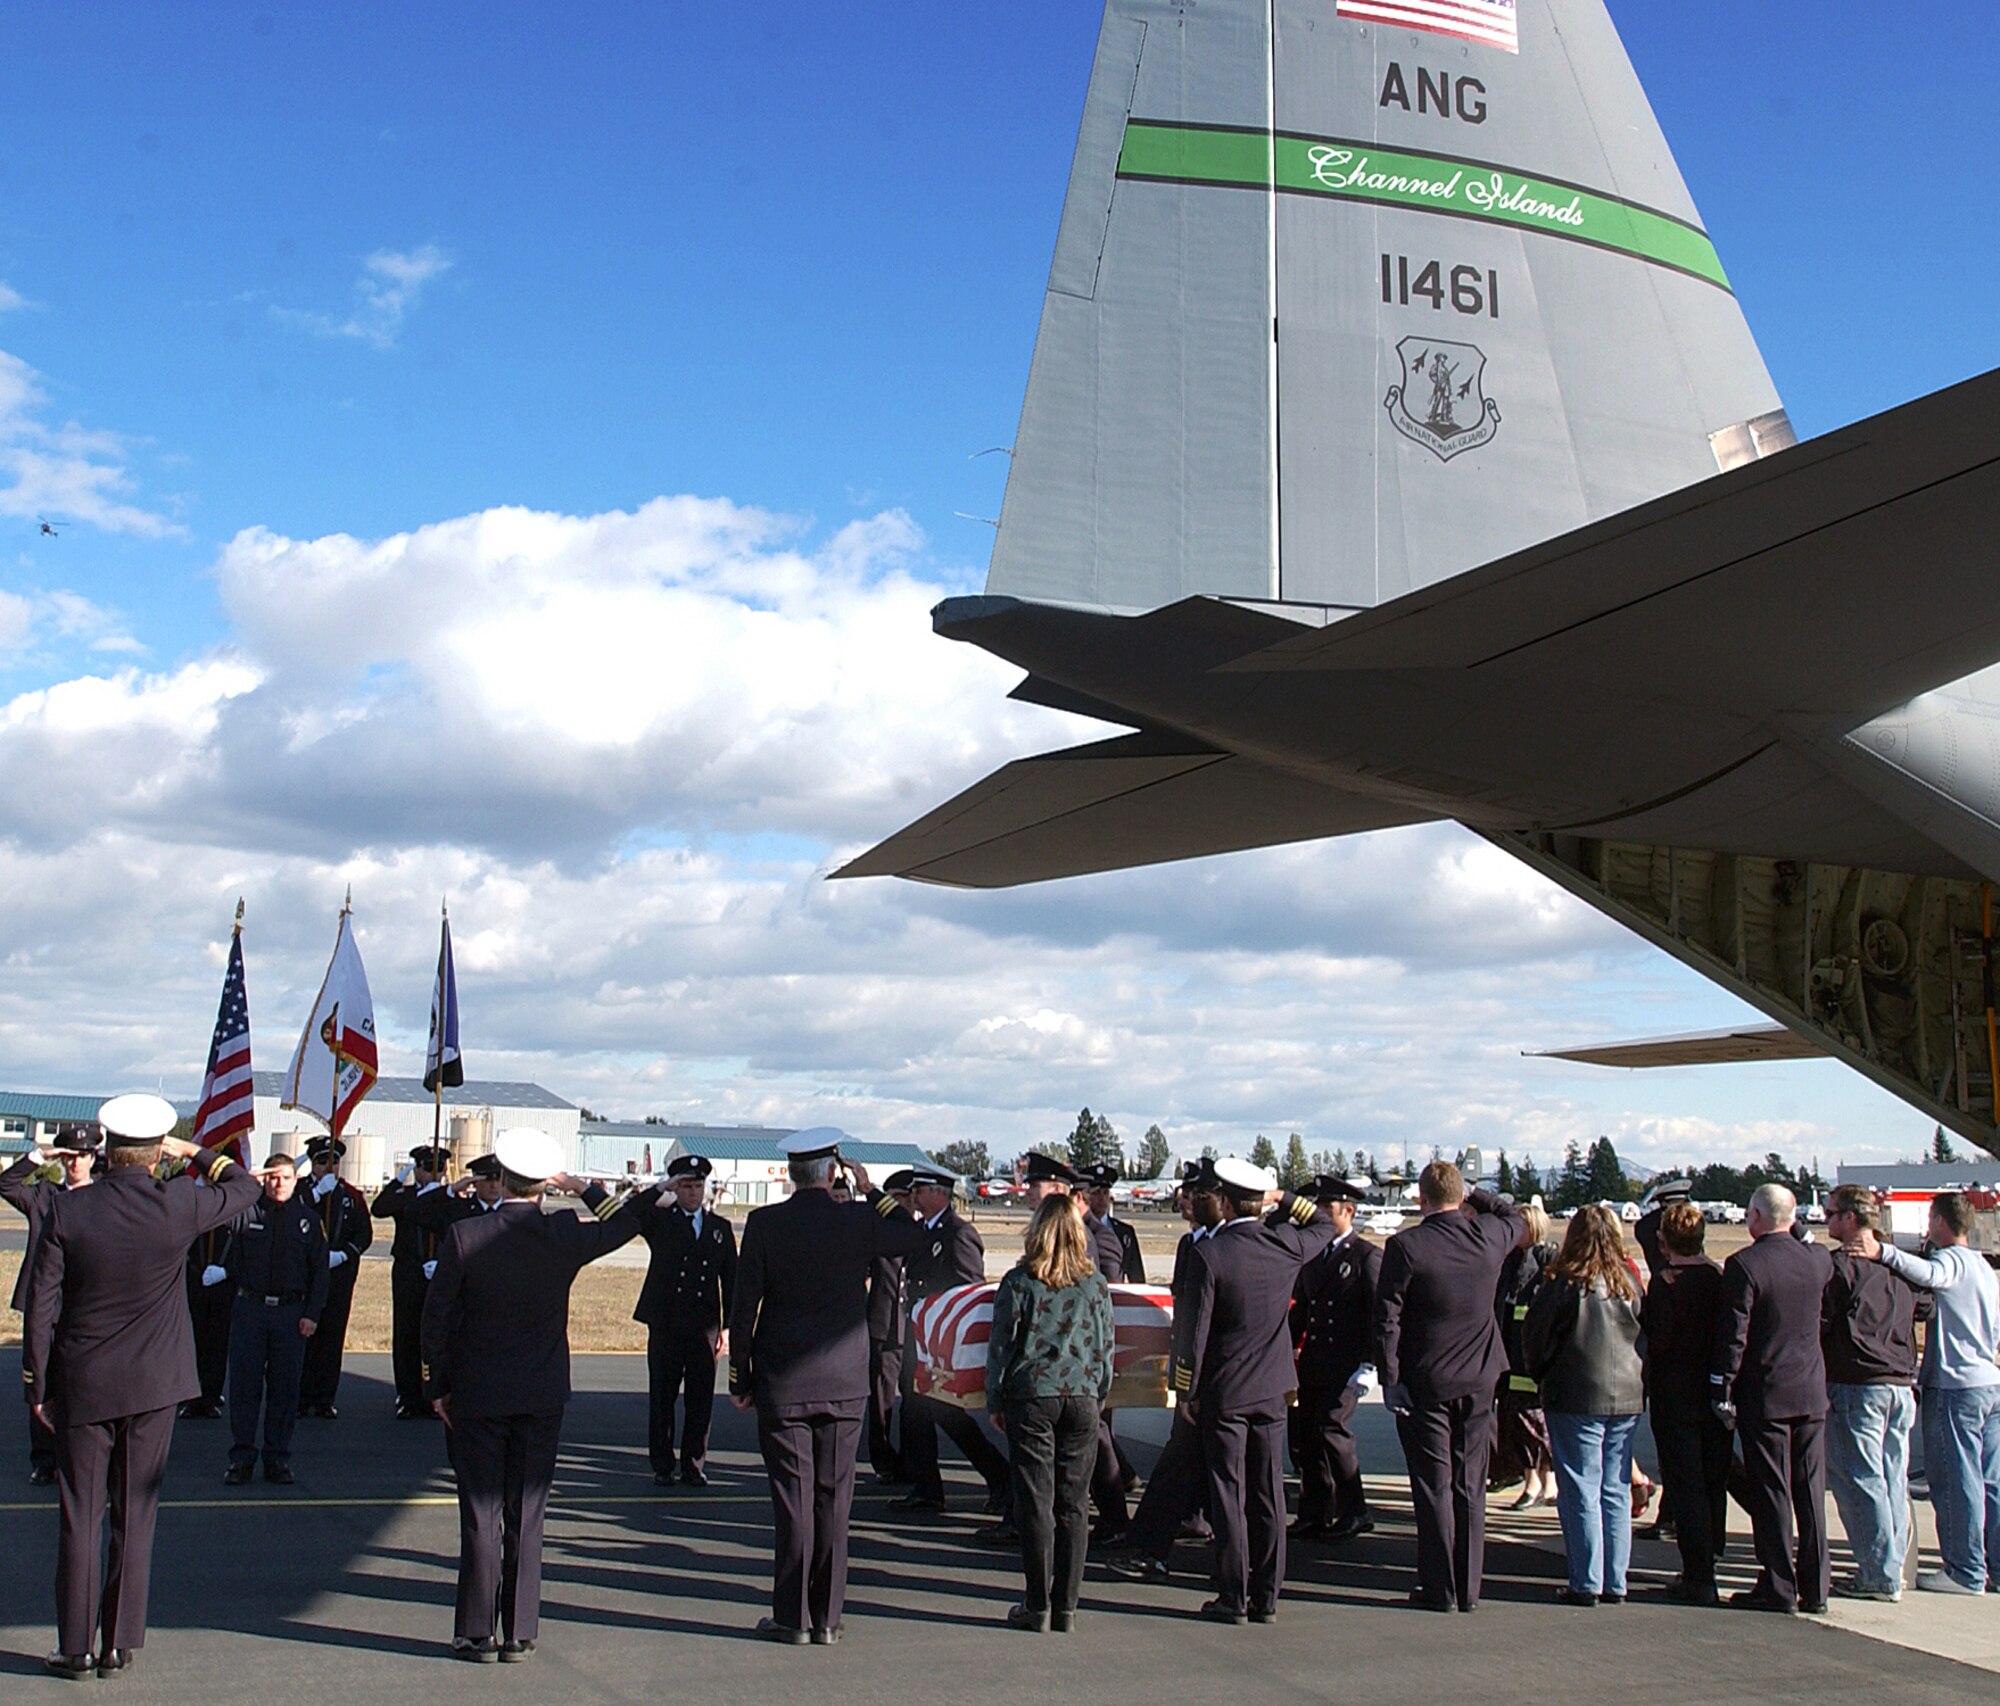 SANTA ROSA COUNTY AIRPORT, Calif.  -- Firefighters salute as the casket of firefighter Steven Rucker is taken from an Air Force C-130 Hercules here.  Rucker, an engineer with the Novato Fire Protection District, died Oct. 29 in San Diego County's Cedar fire.  (U.S. Air Force photo by Staff Sgt. Alex J. Koenig)